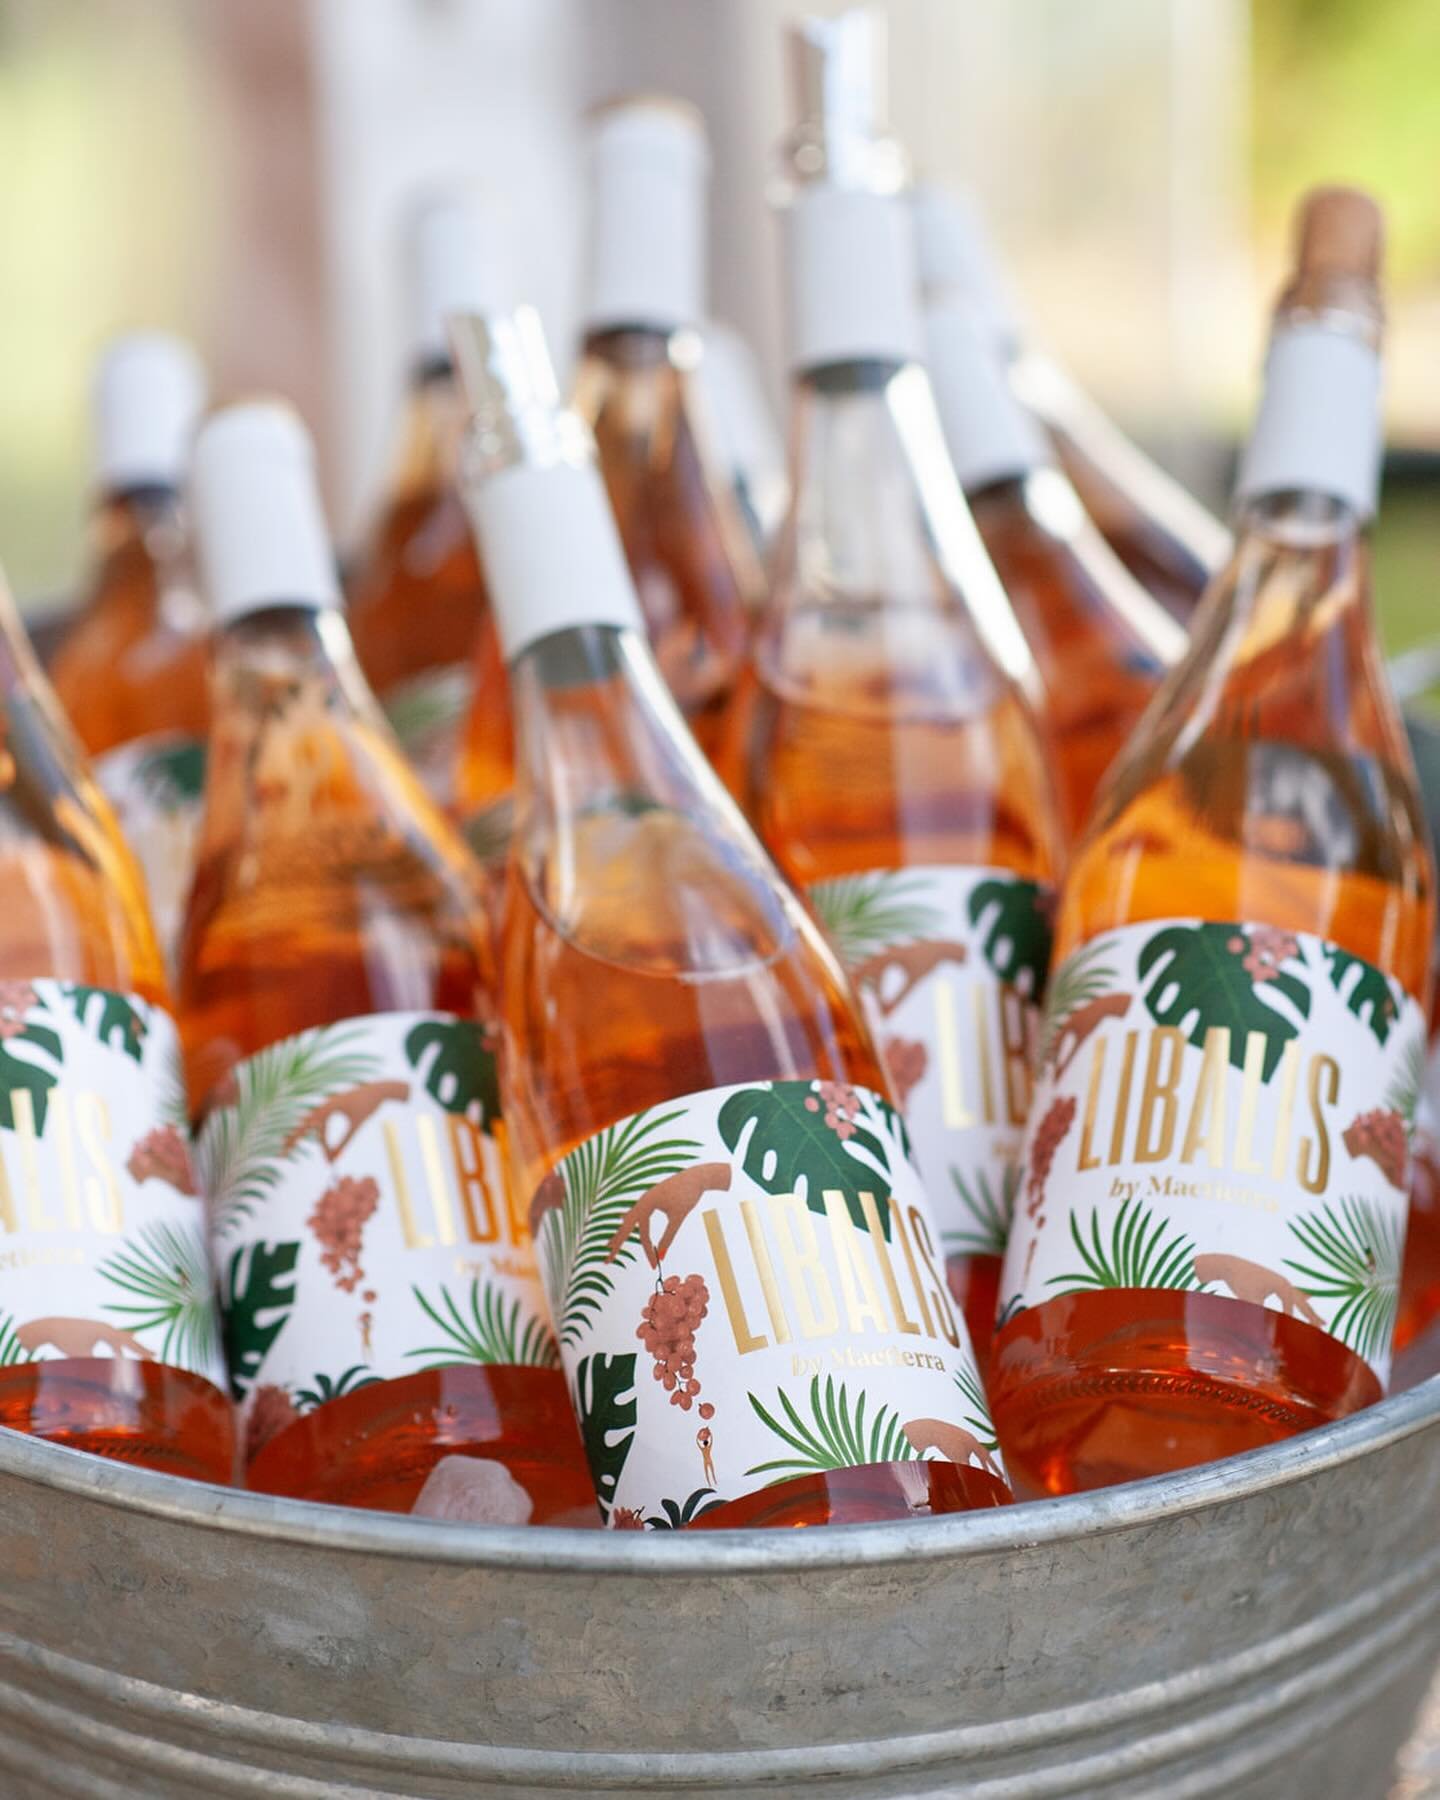 SECURE YOUR TICKETS FOR A CHANCE TO WIN!
Purchase your Ros&eacute; and Croquet tickets by April 30, 2024 at 11:59pm MST to seize the opportunity to win an exclusive garden patio party at Deane House for you and three friends! Every ticket purchased b